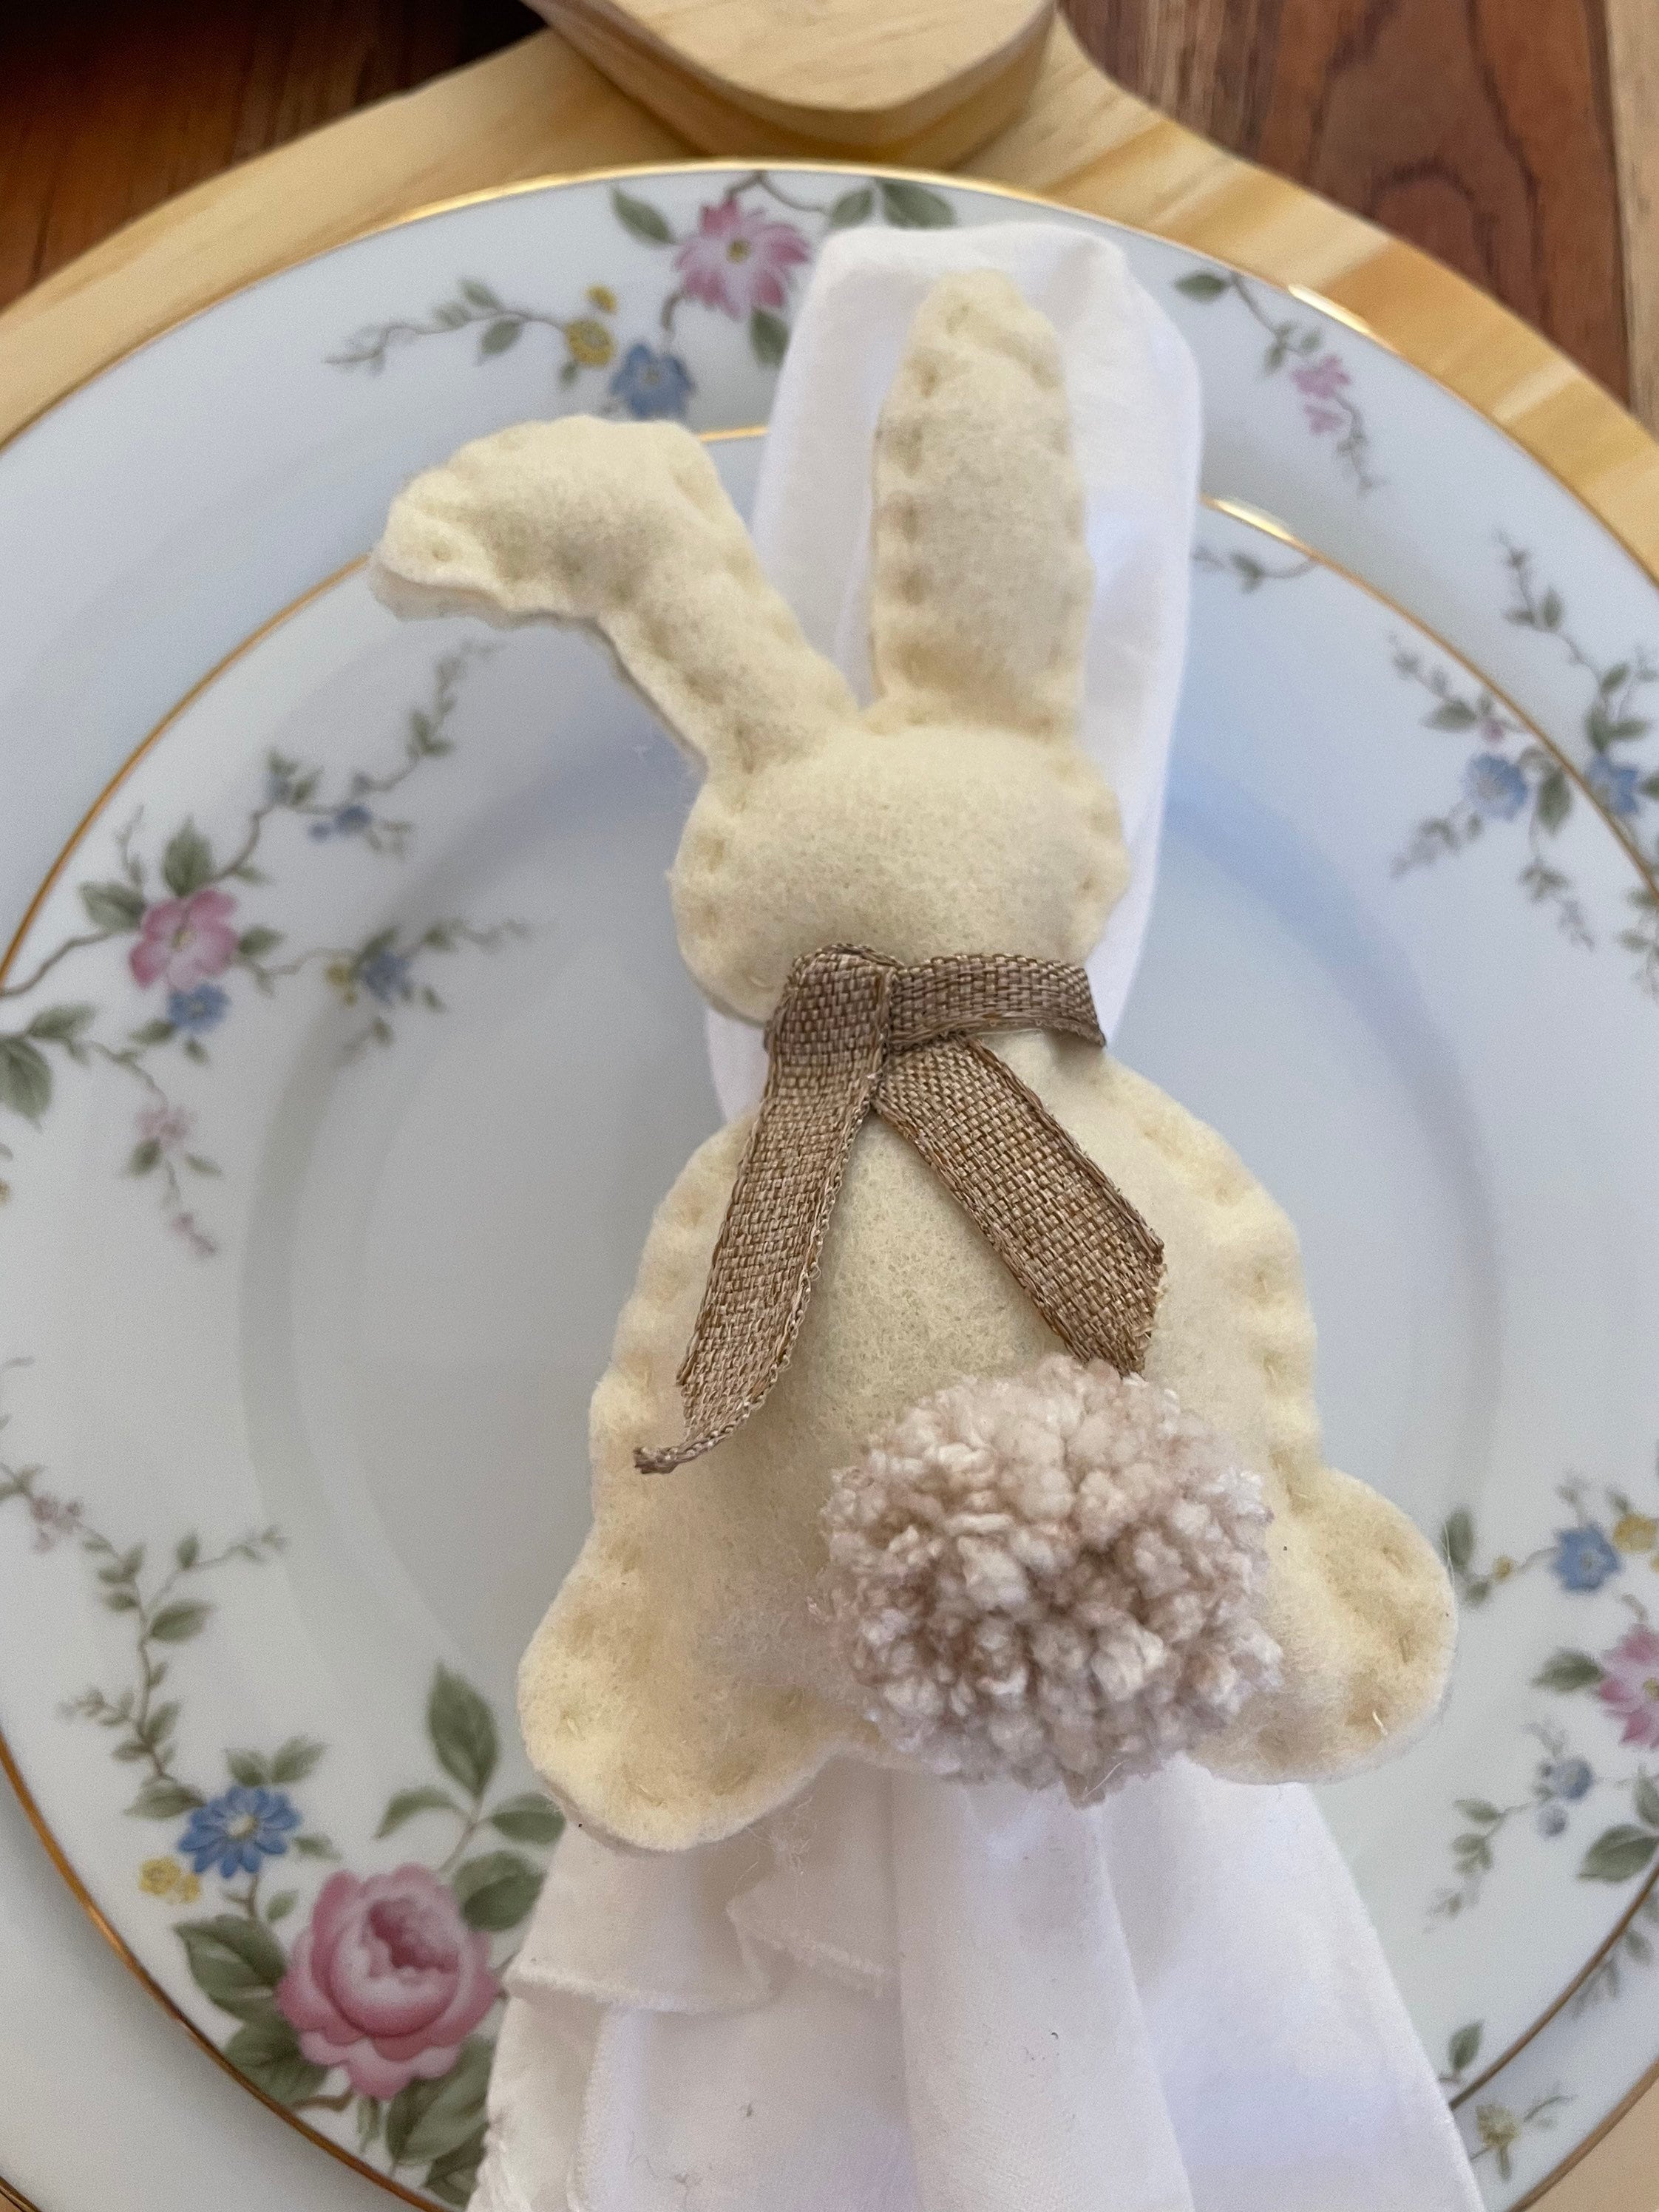 Bunny Napkin Rings - A Wonderful Thought